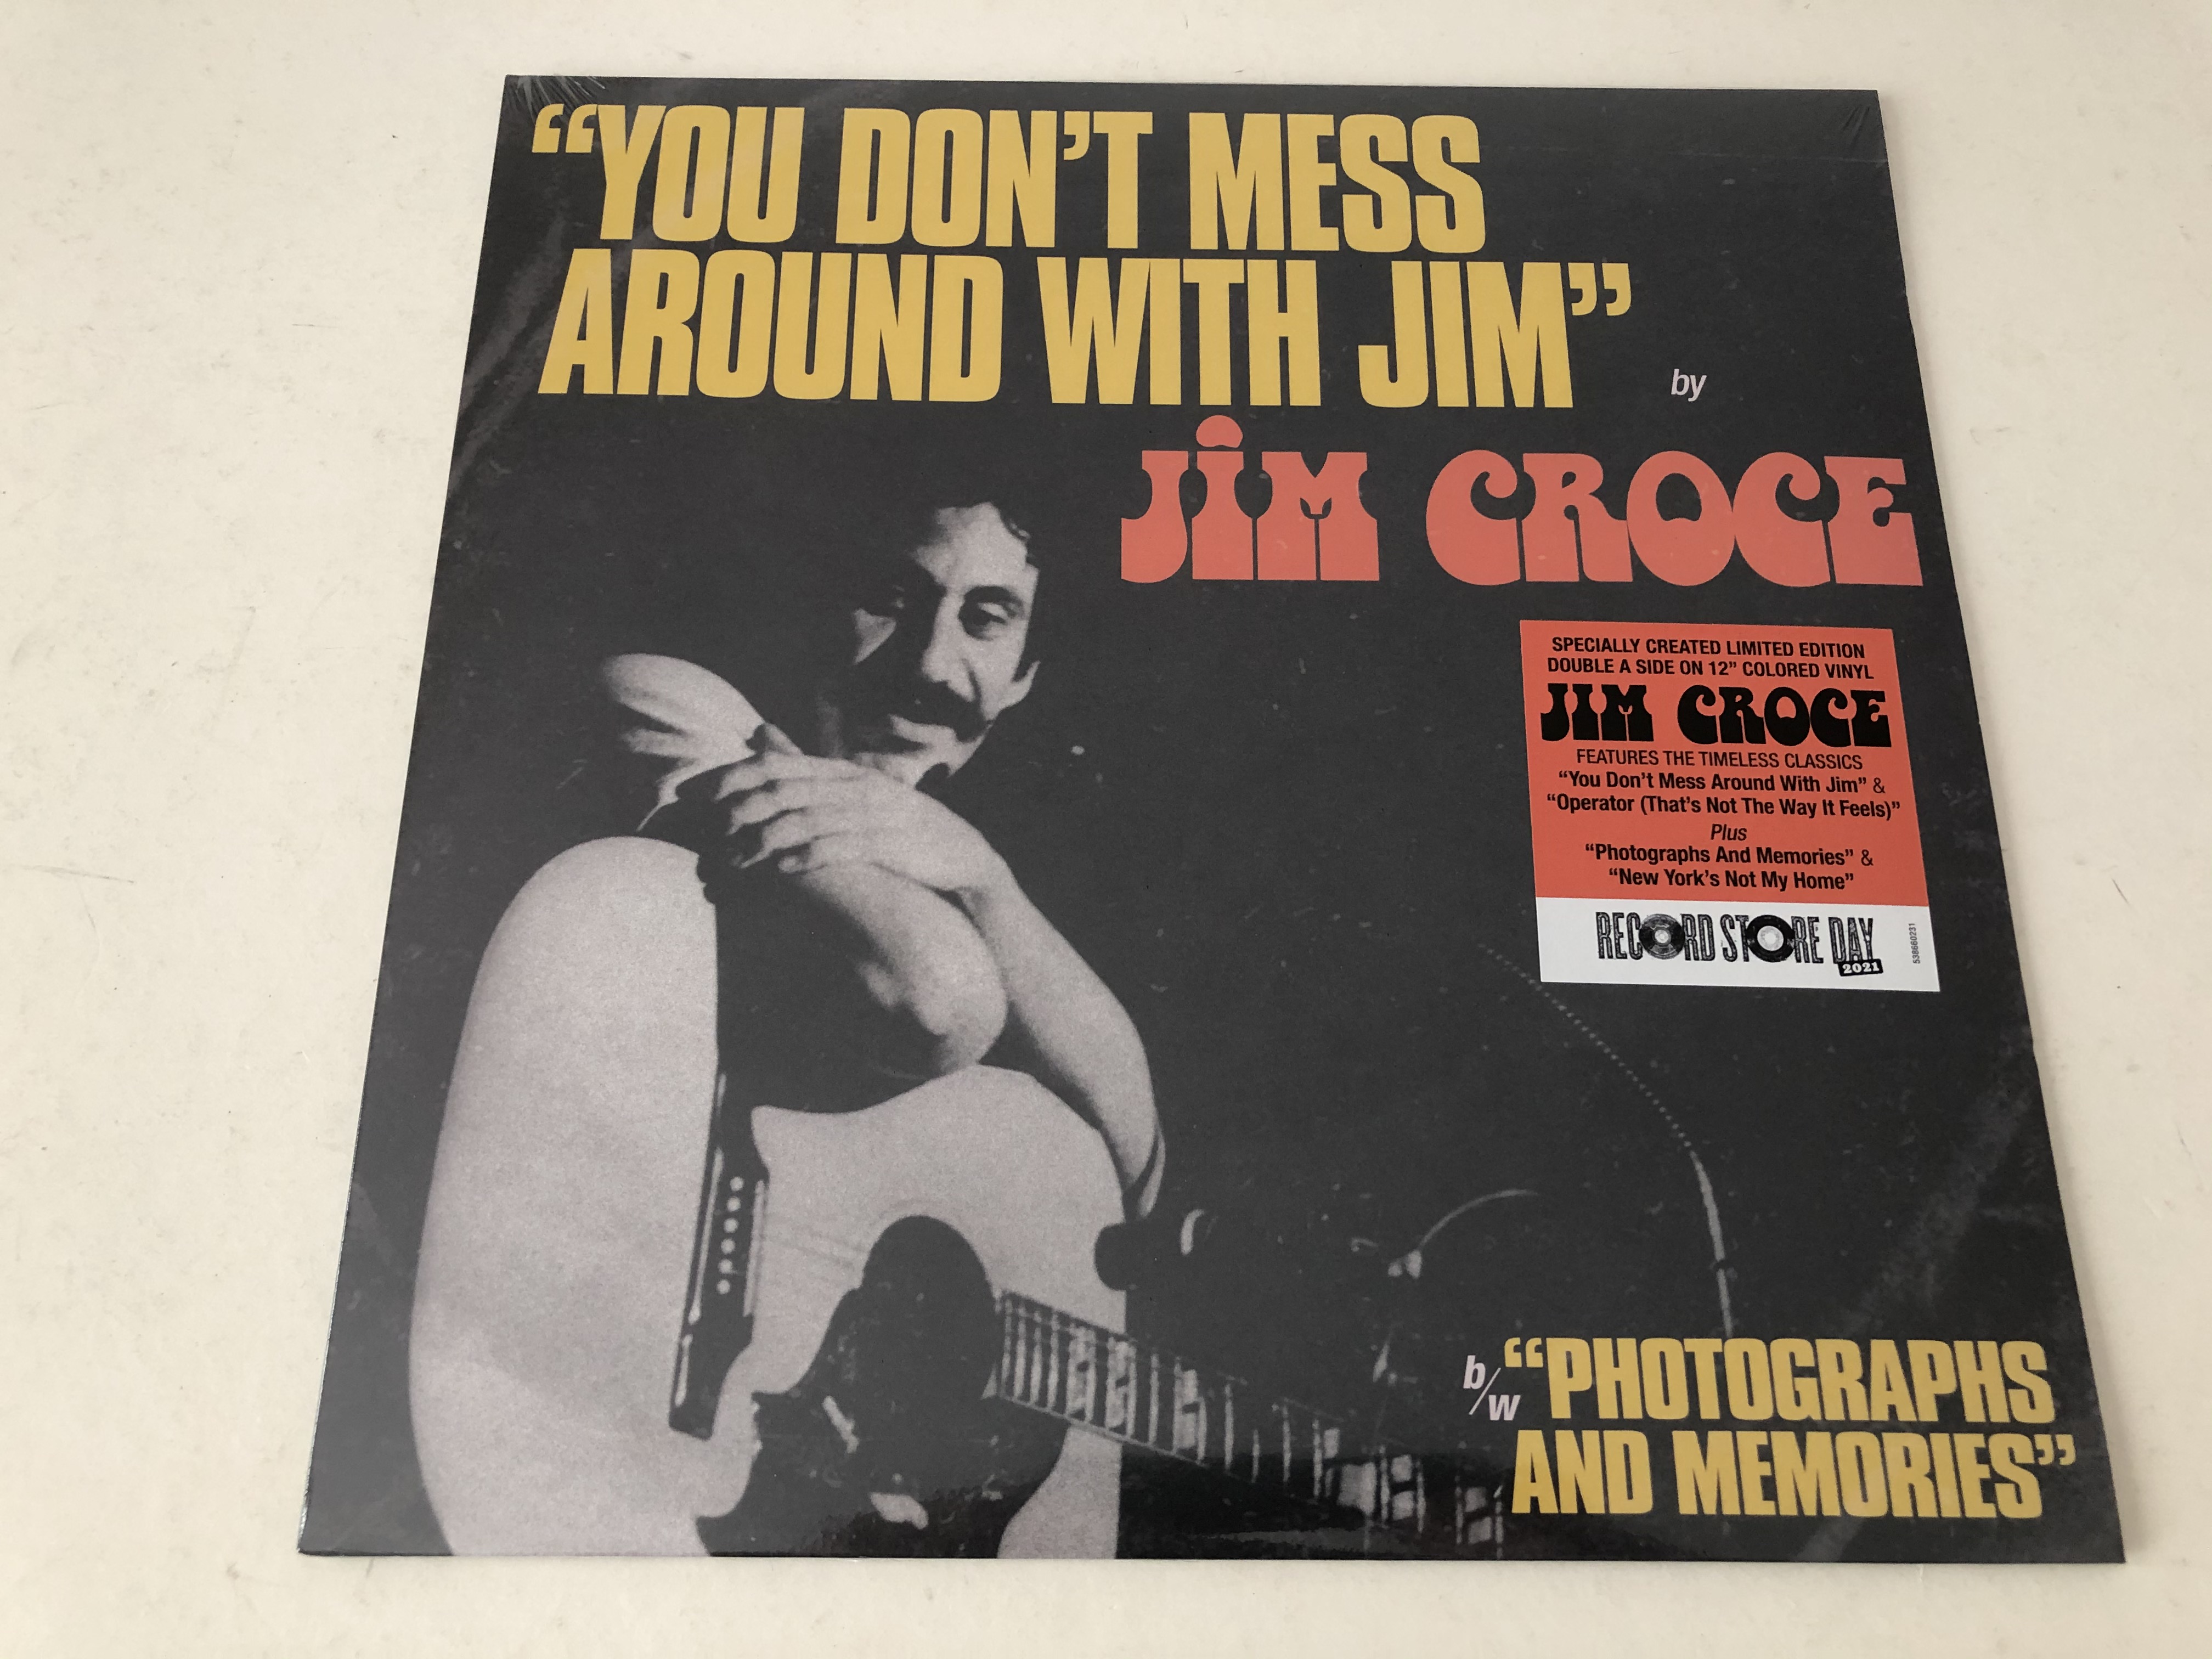 You Don't Mess Around With Jim (TANGERINE Vinyl)